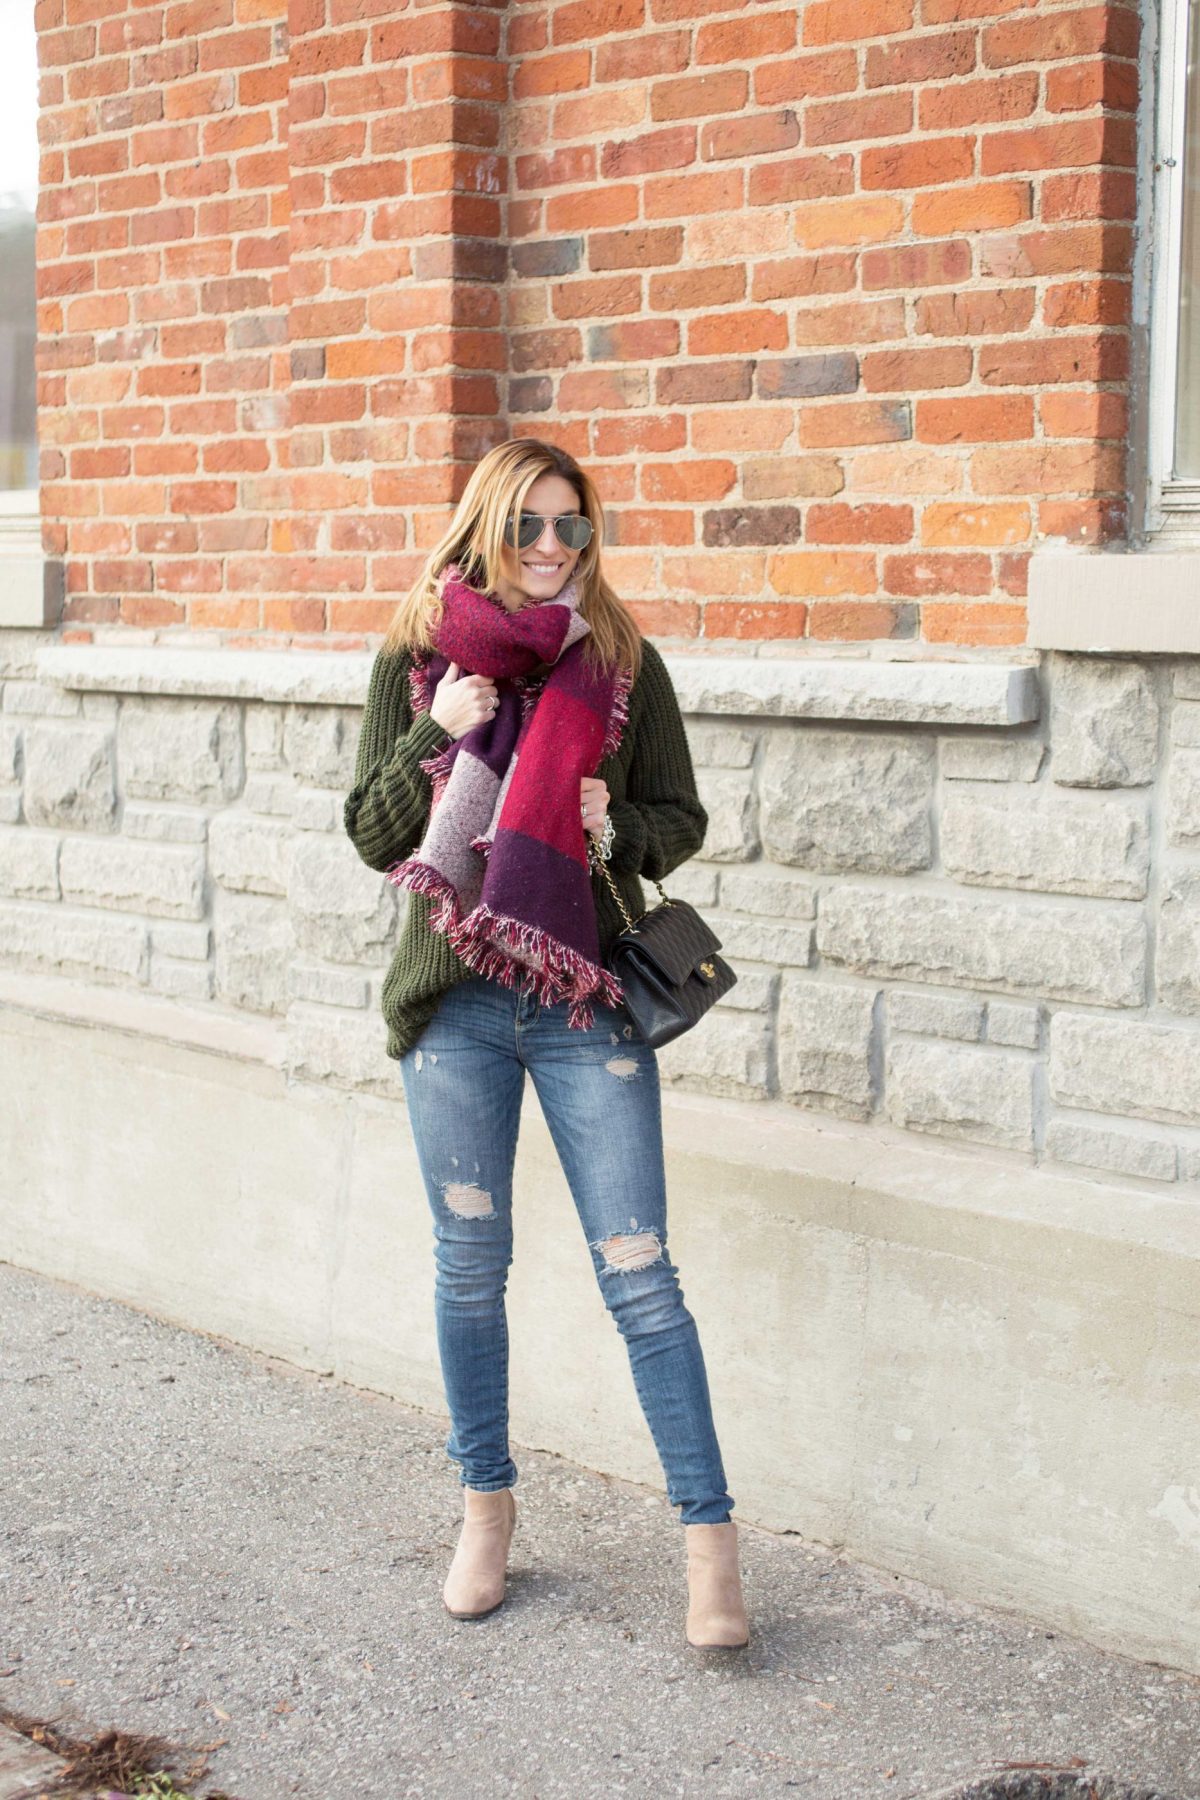 Oversized scarf with cable-knit sweater distressed jeans and Chanel bag